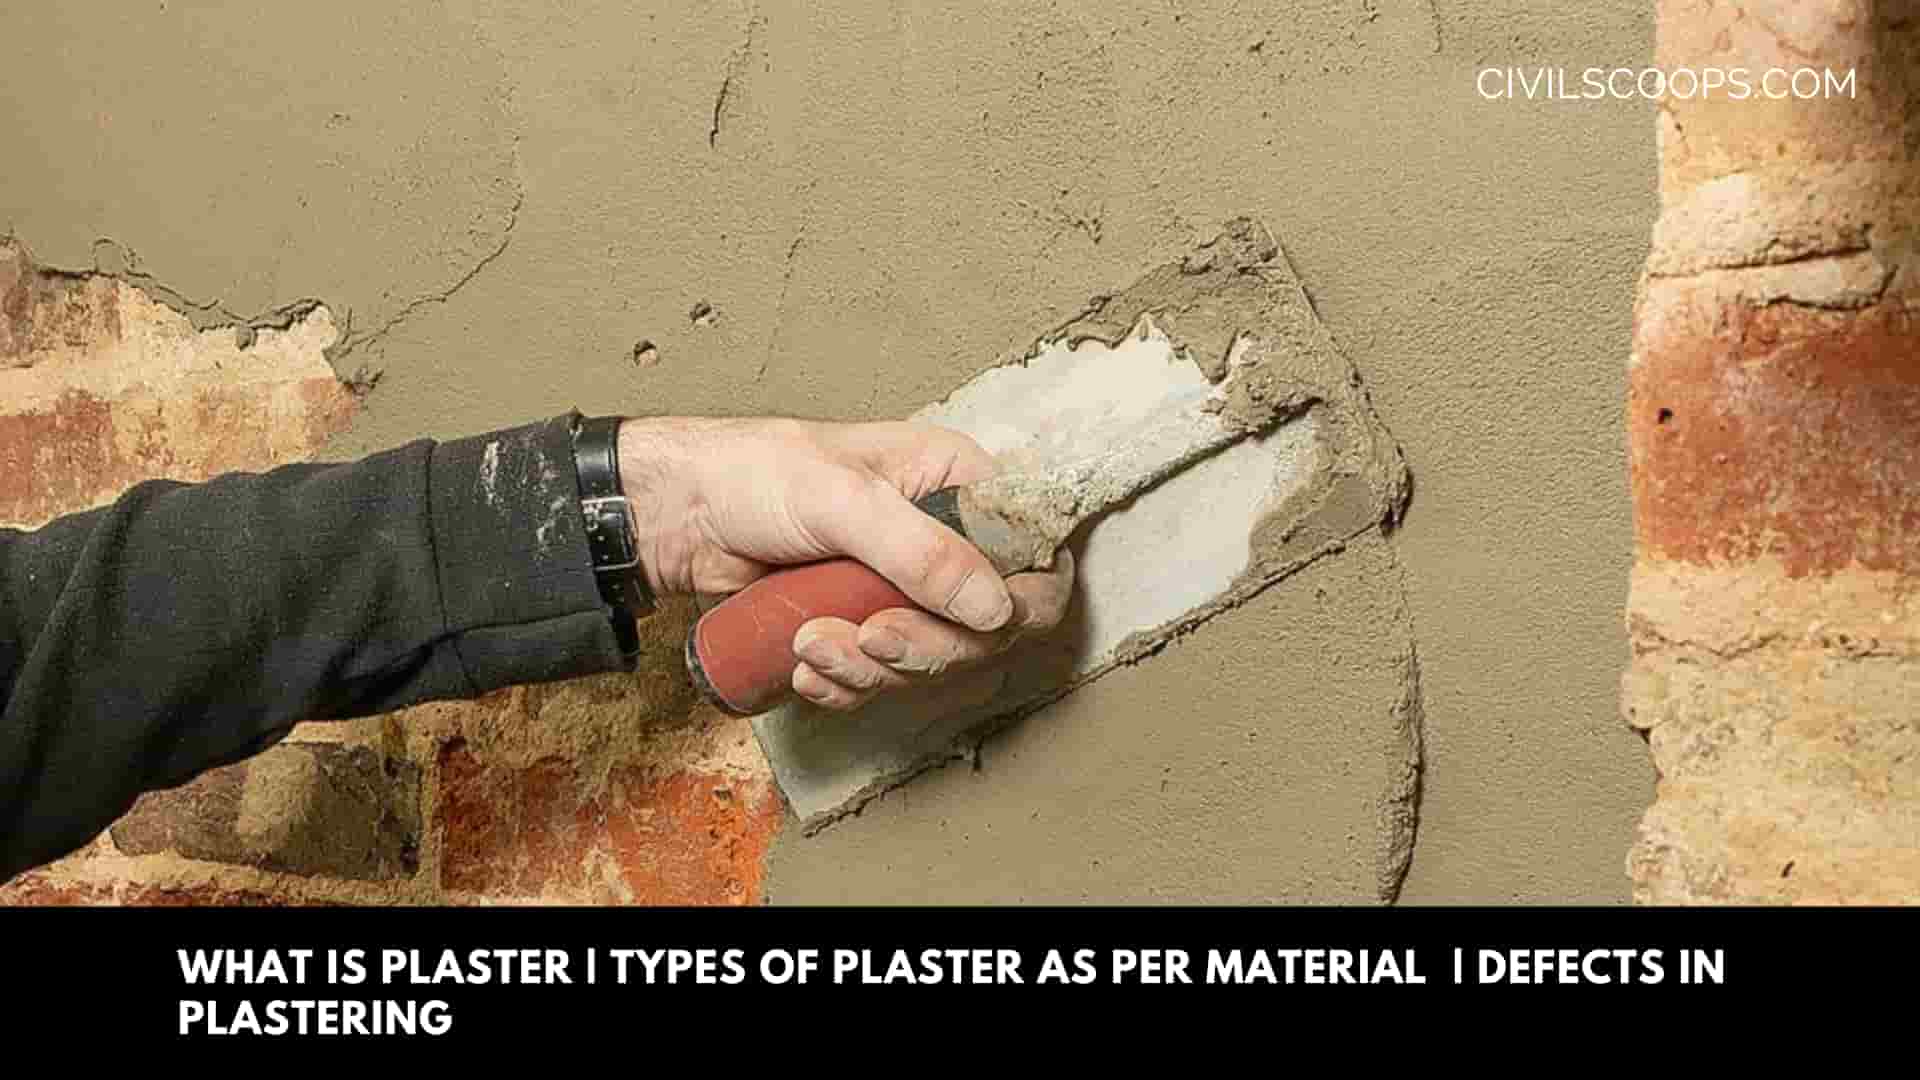 What Is Plaster Types of Plaster As Per Material Defects In Plastering